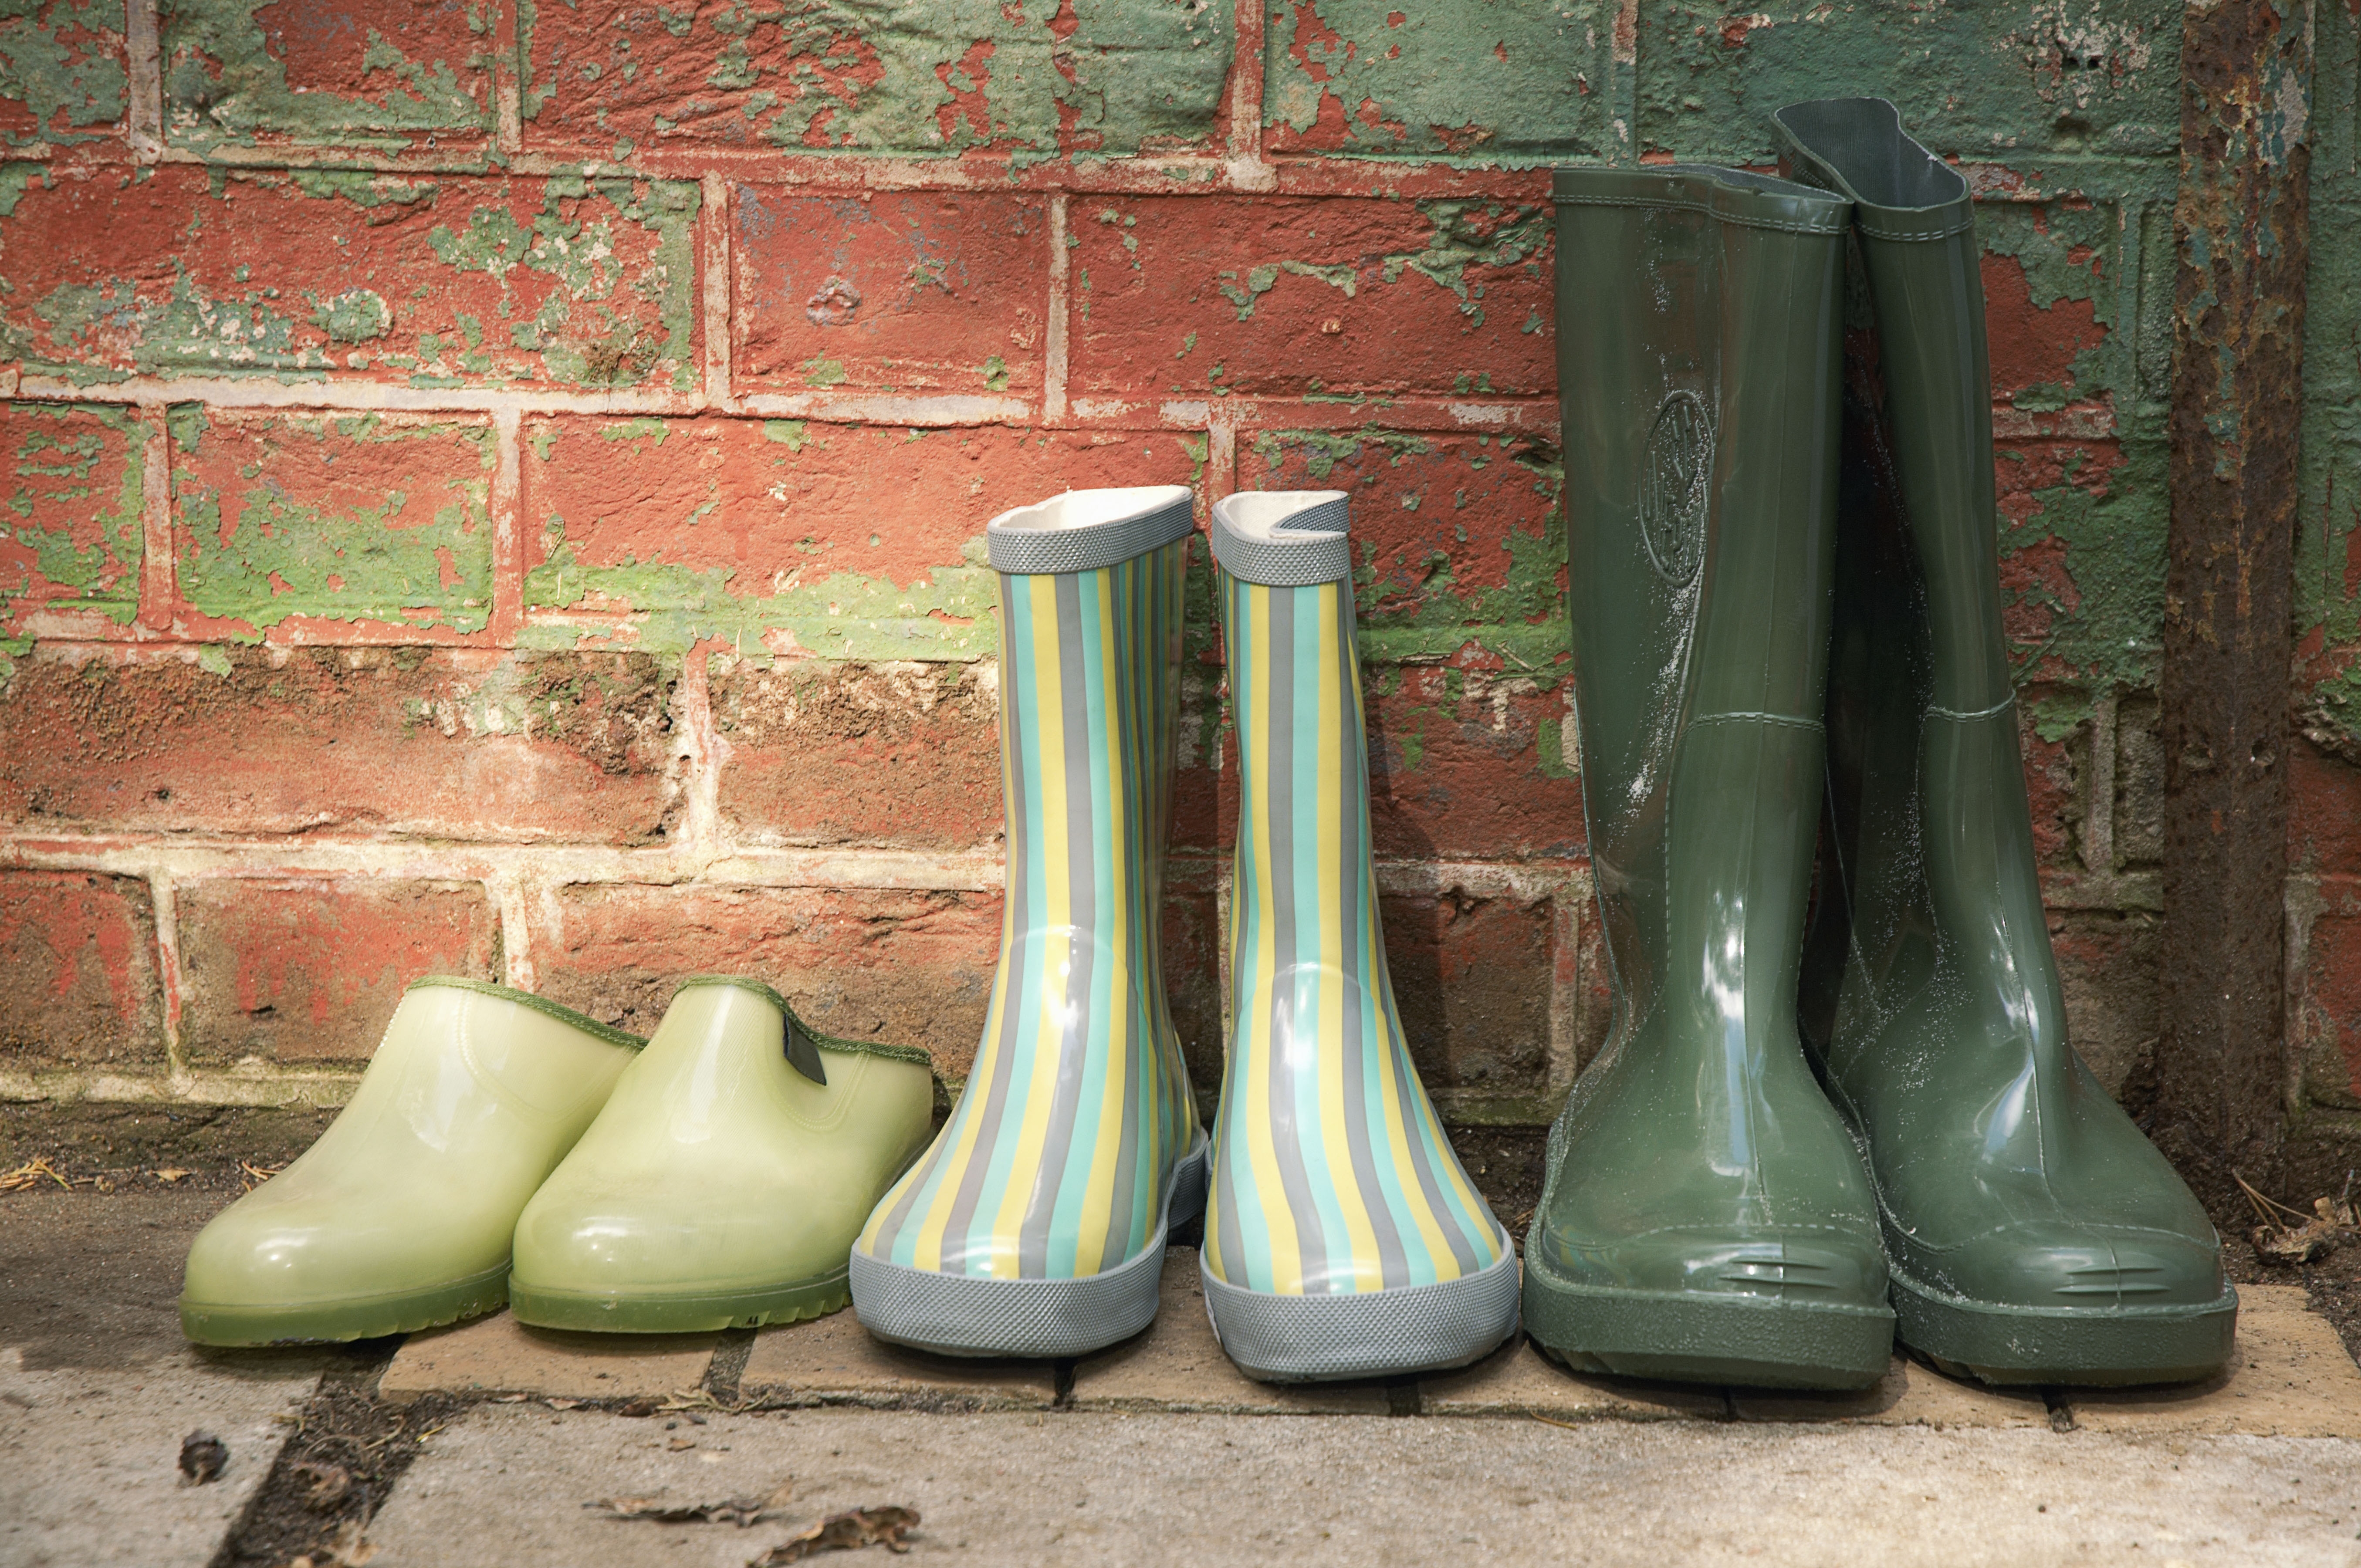 miscellanea, miscellaneous, boots, footwear, galoshes, goloshes, rubber